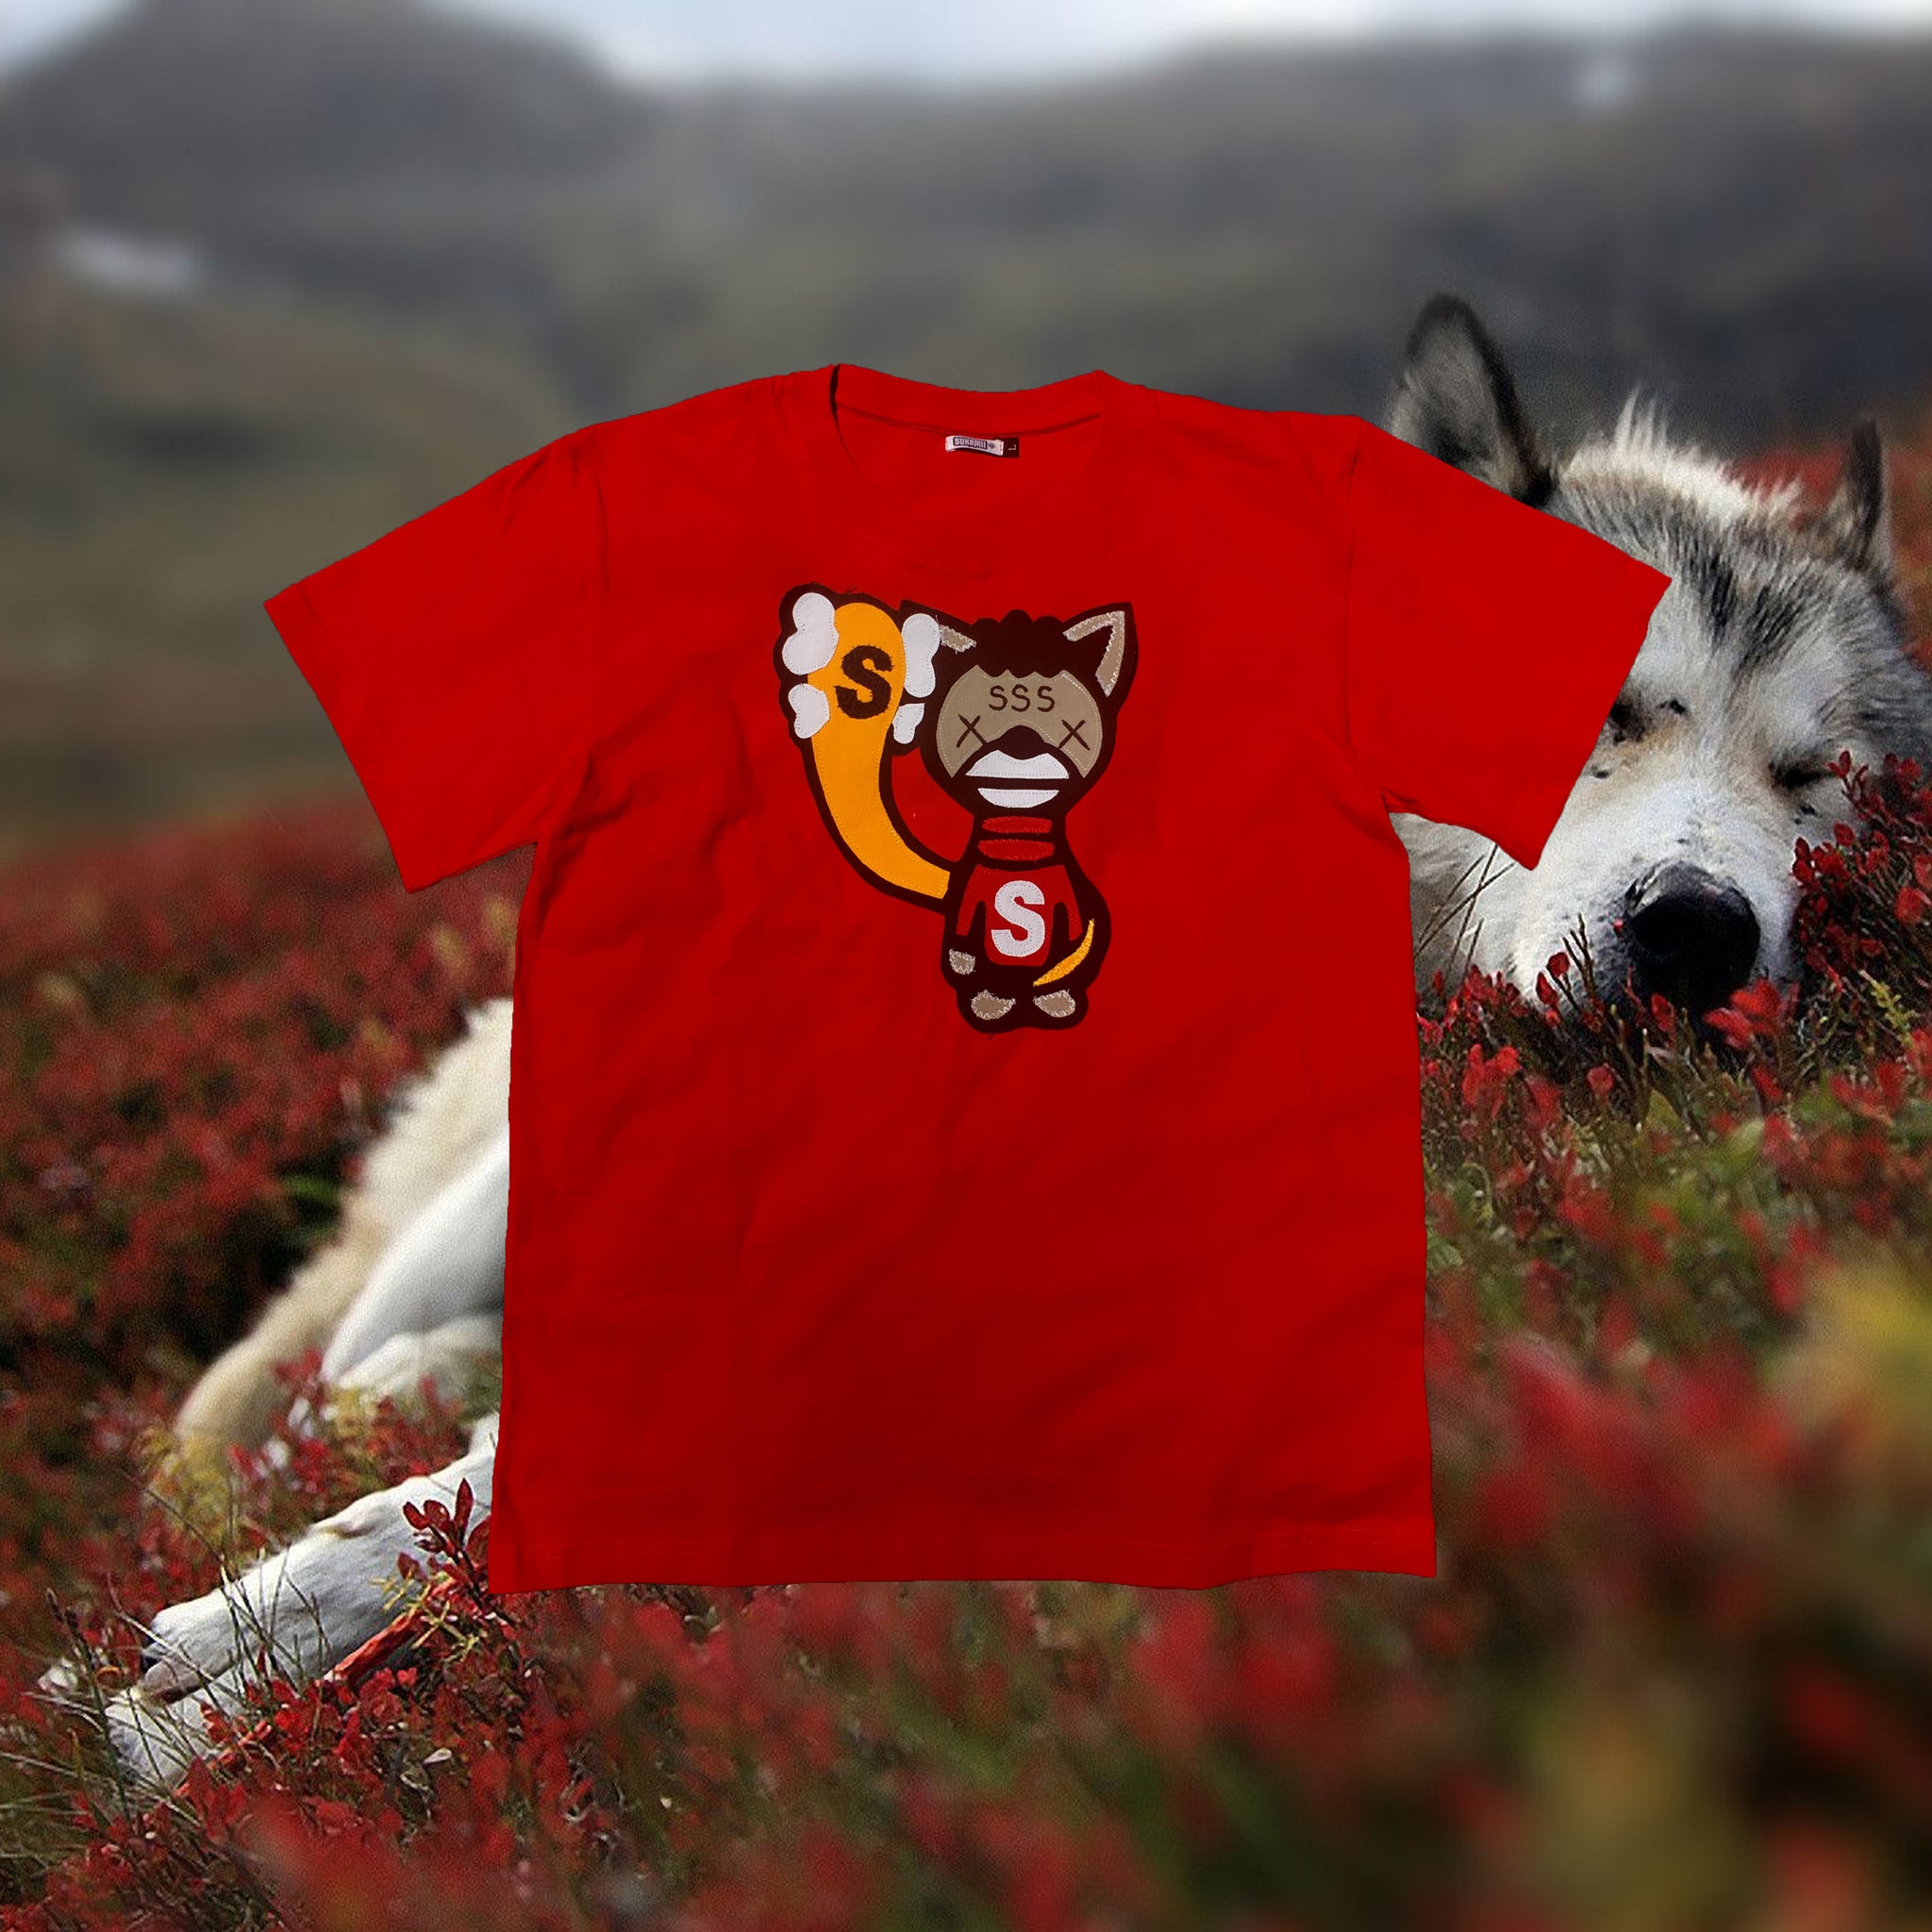 The Boy Who Cried Wolf T shirt Red